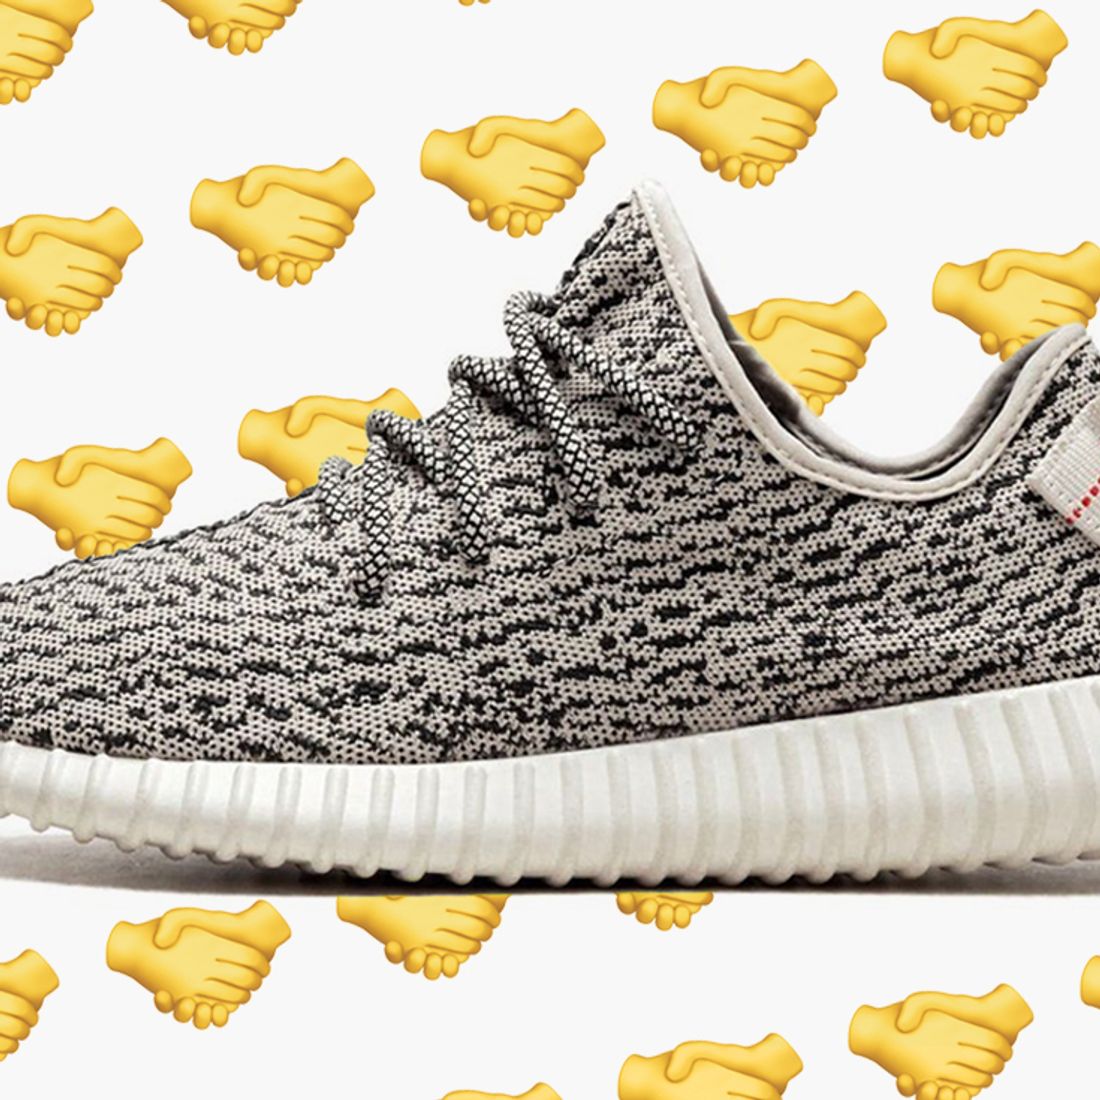 Kanye West Twitter YEEZY Shoes Design Reveal